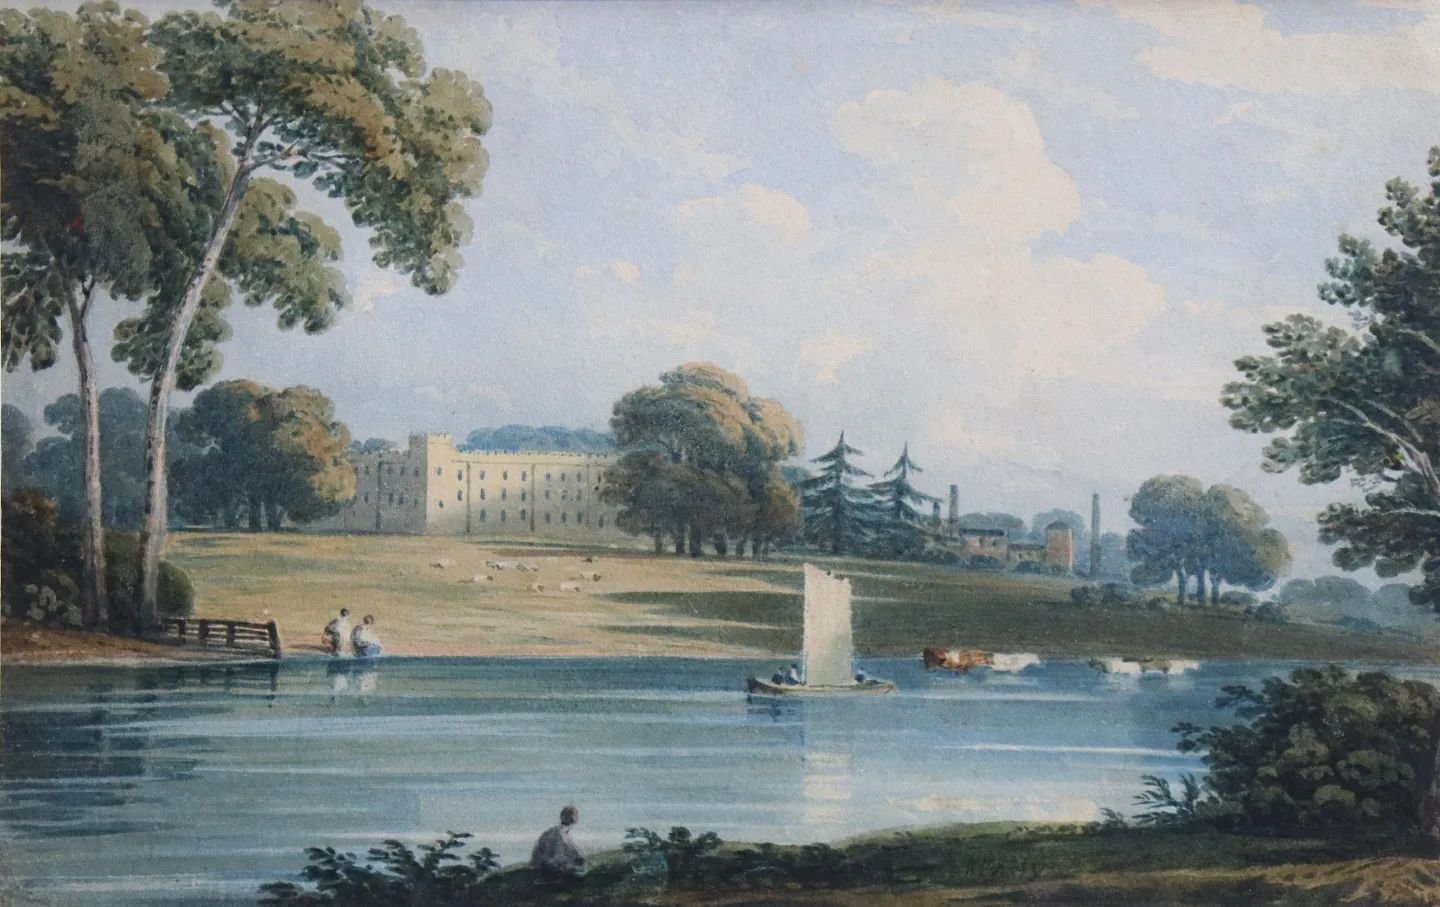 .
John Varley (1778-1842)
Sion House, Isleworth

Included in our 28th May Fine Art &amp; Antiques Sale 

Entries invited until 18th May 

.

.

.

.

.

.

.

.

.

#fineart #antiques #painting #paintings #watercolour #watercolorpainting #johnvarley 